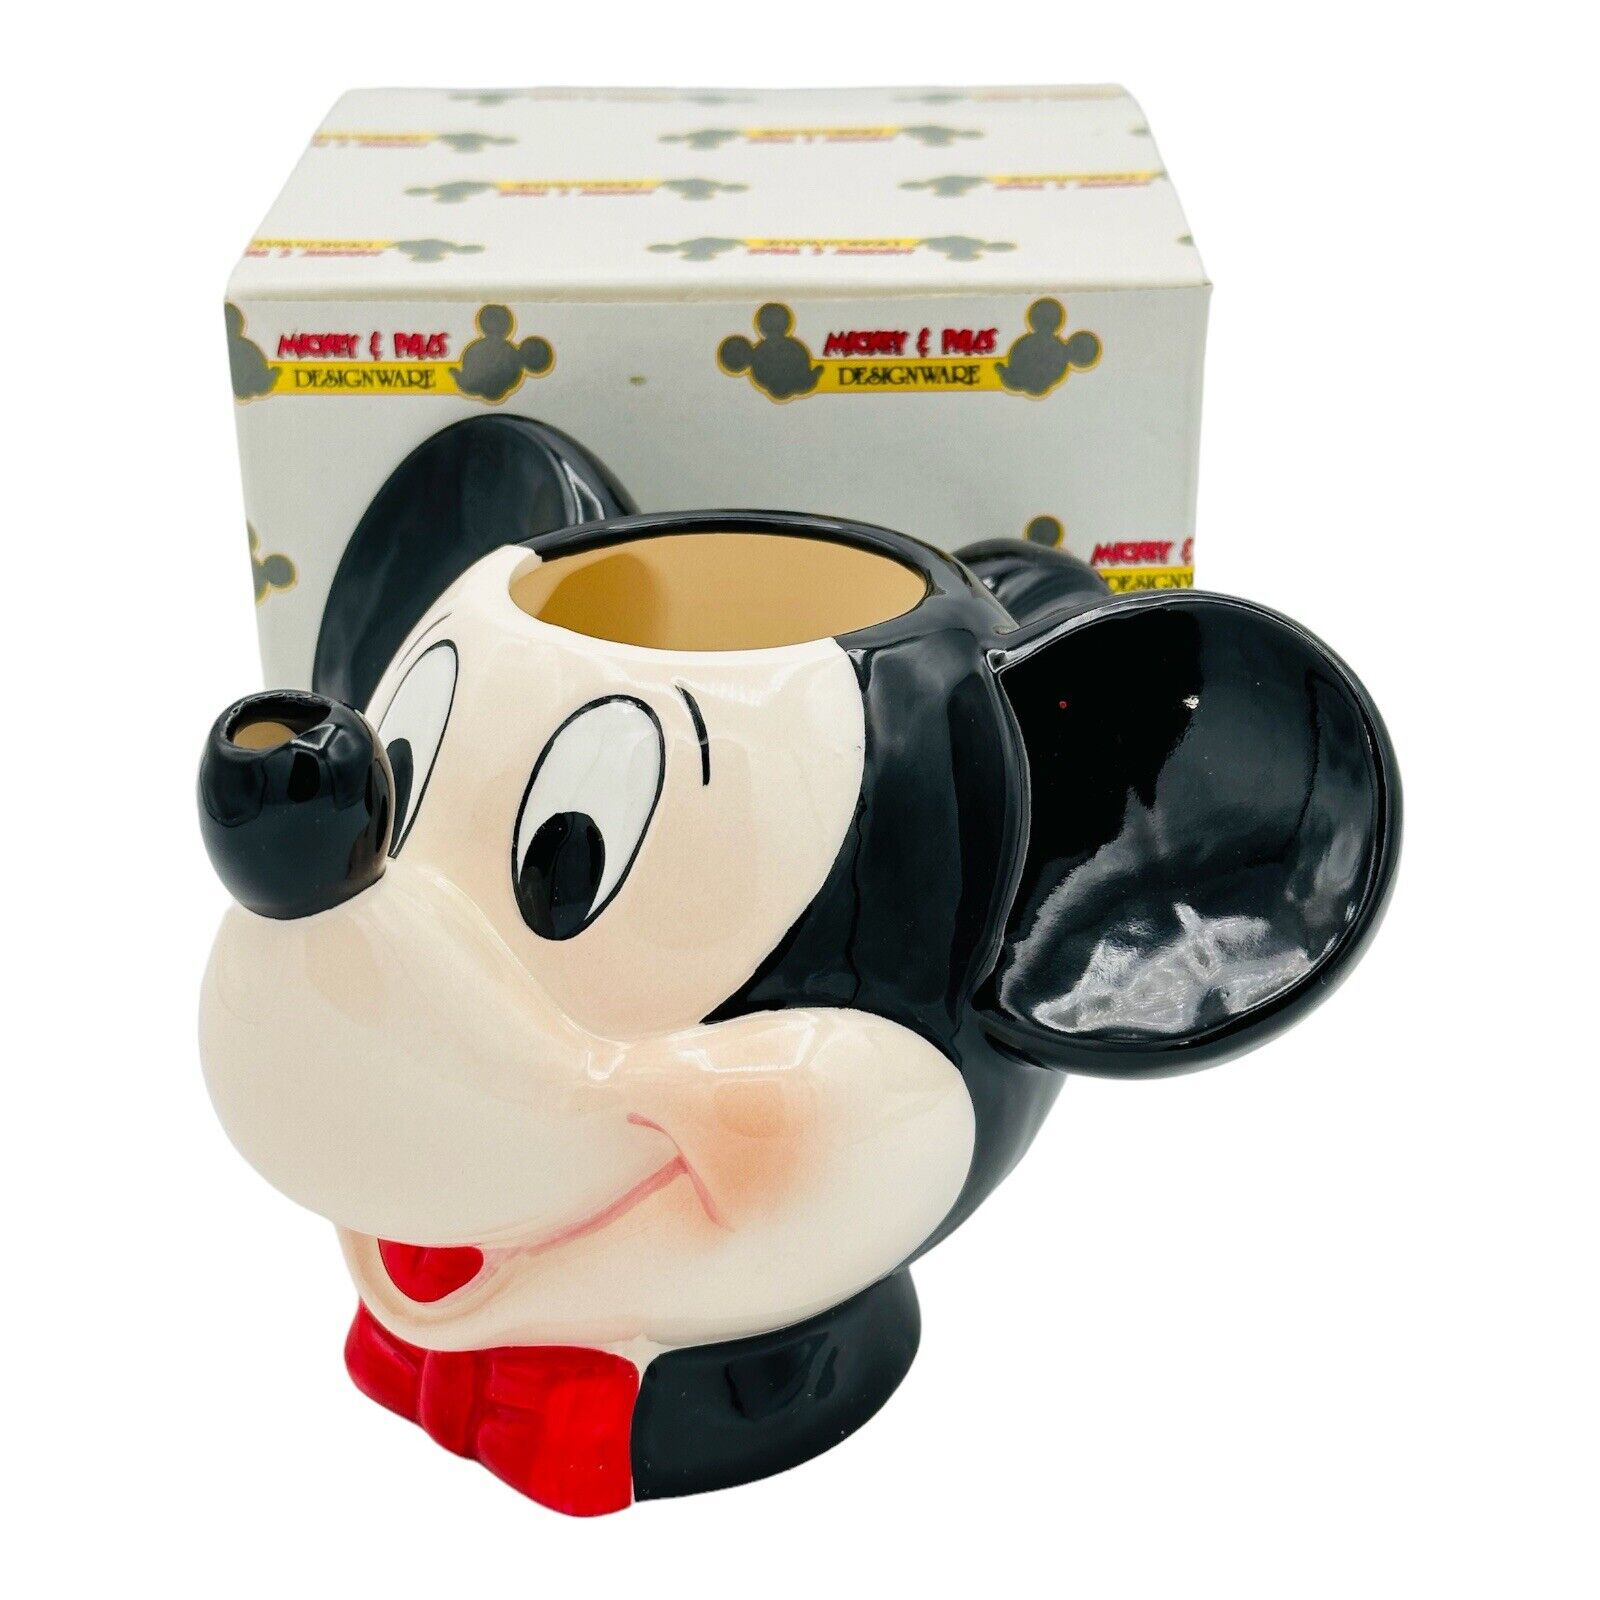 Applause Mickey and Pals Designware Mickey Mouse Creamer NEW IN BOX